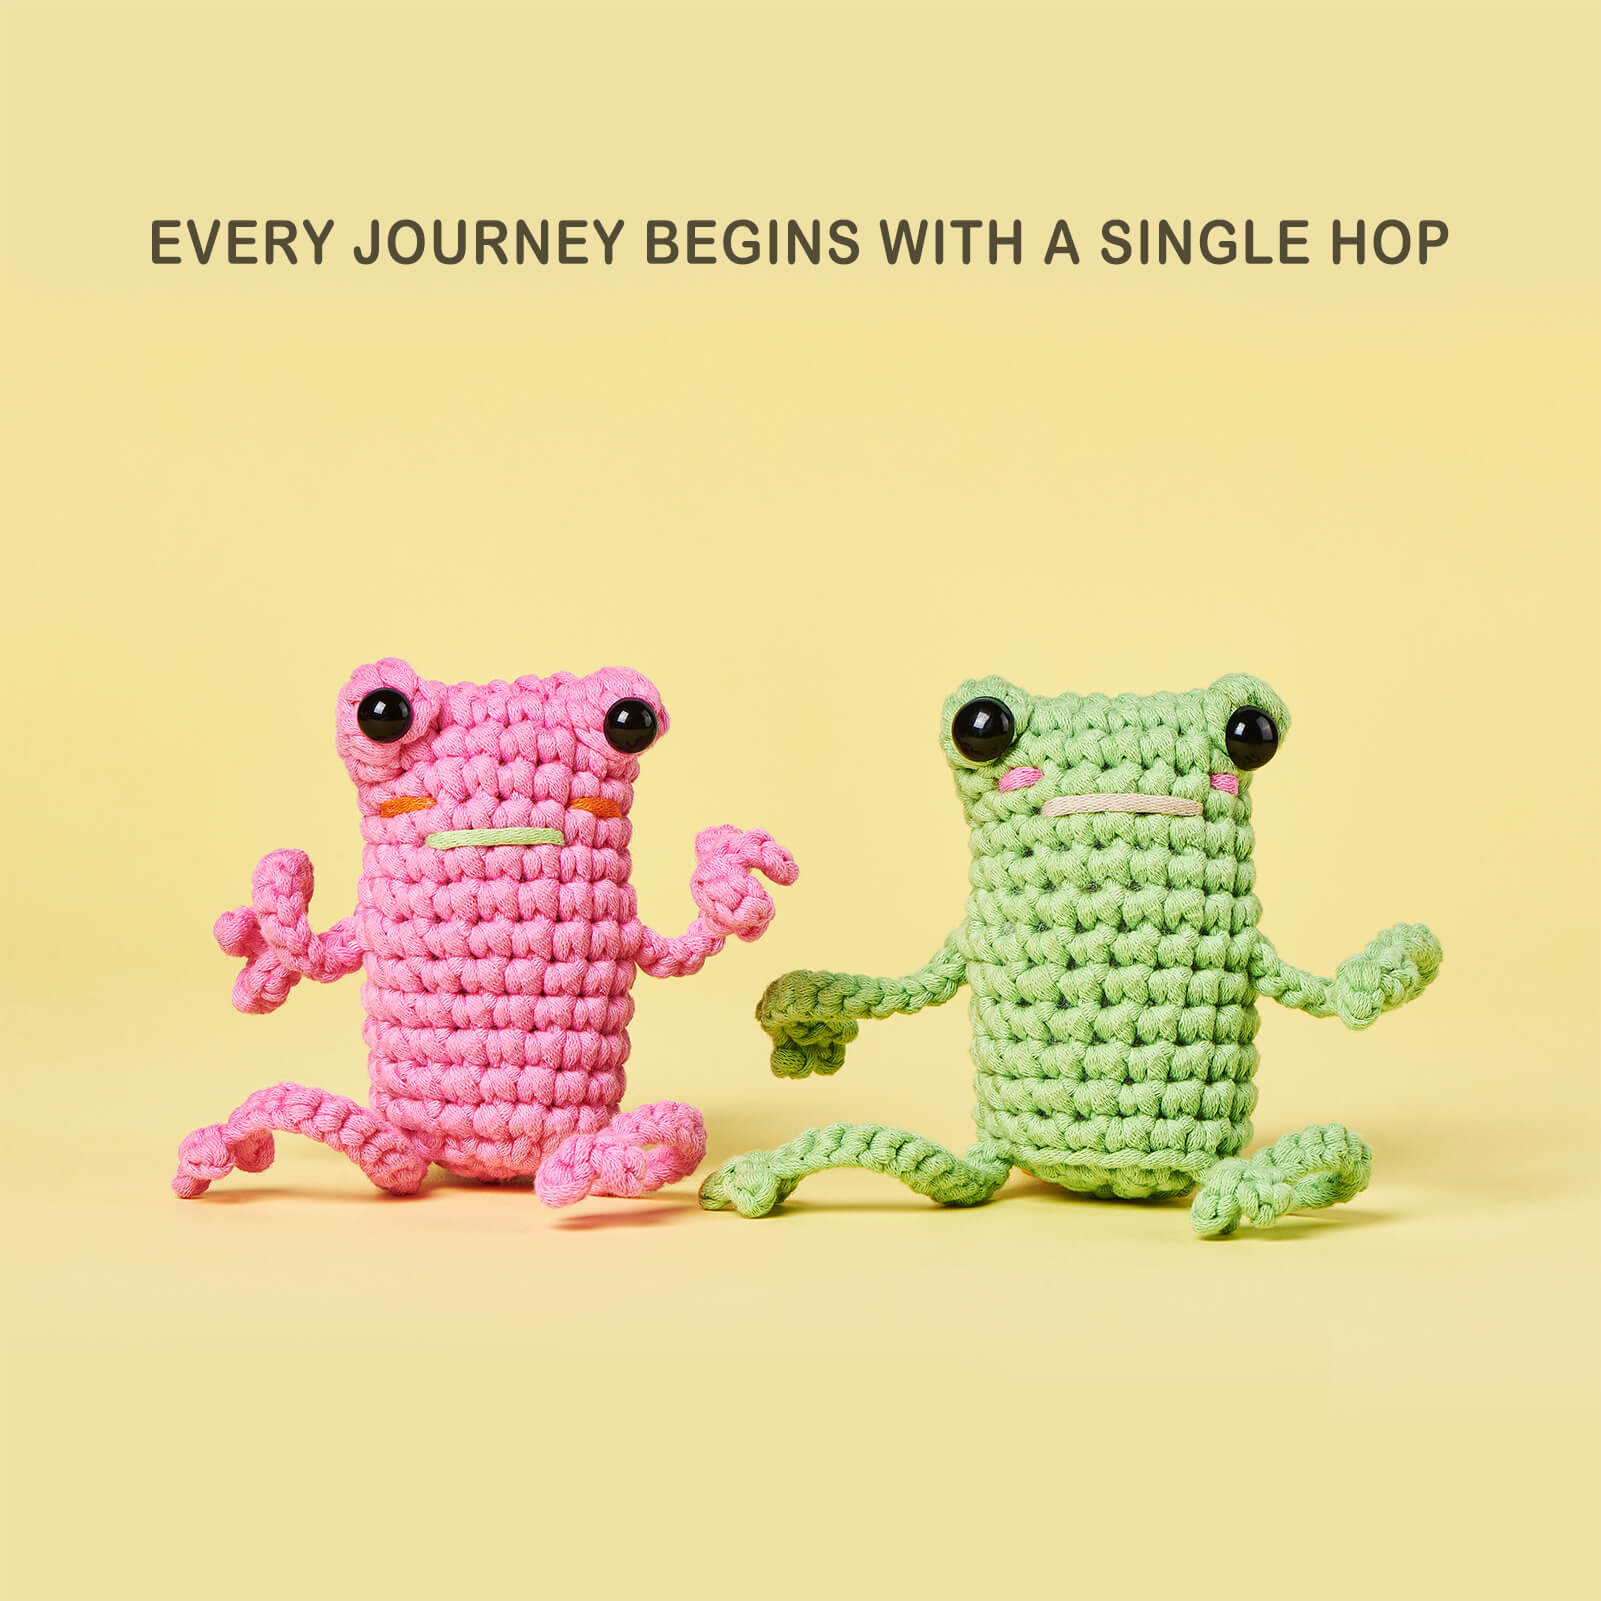 Crochet Kit for Beginners, Learn to Crochet Kits for Adults and Kids, Animal Amigurumi Crochet Kit with Step-by-Step Video Tutorials for Right- and Left-Handed People, Leggy Frog Kit